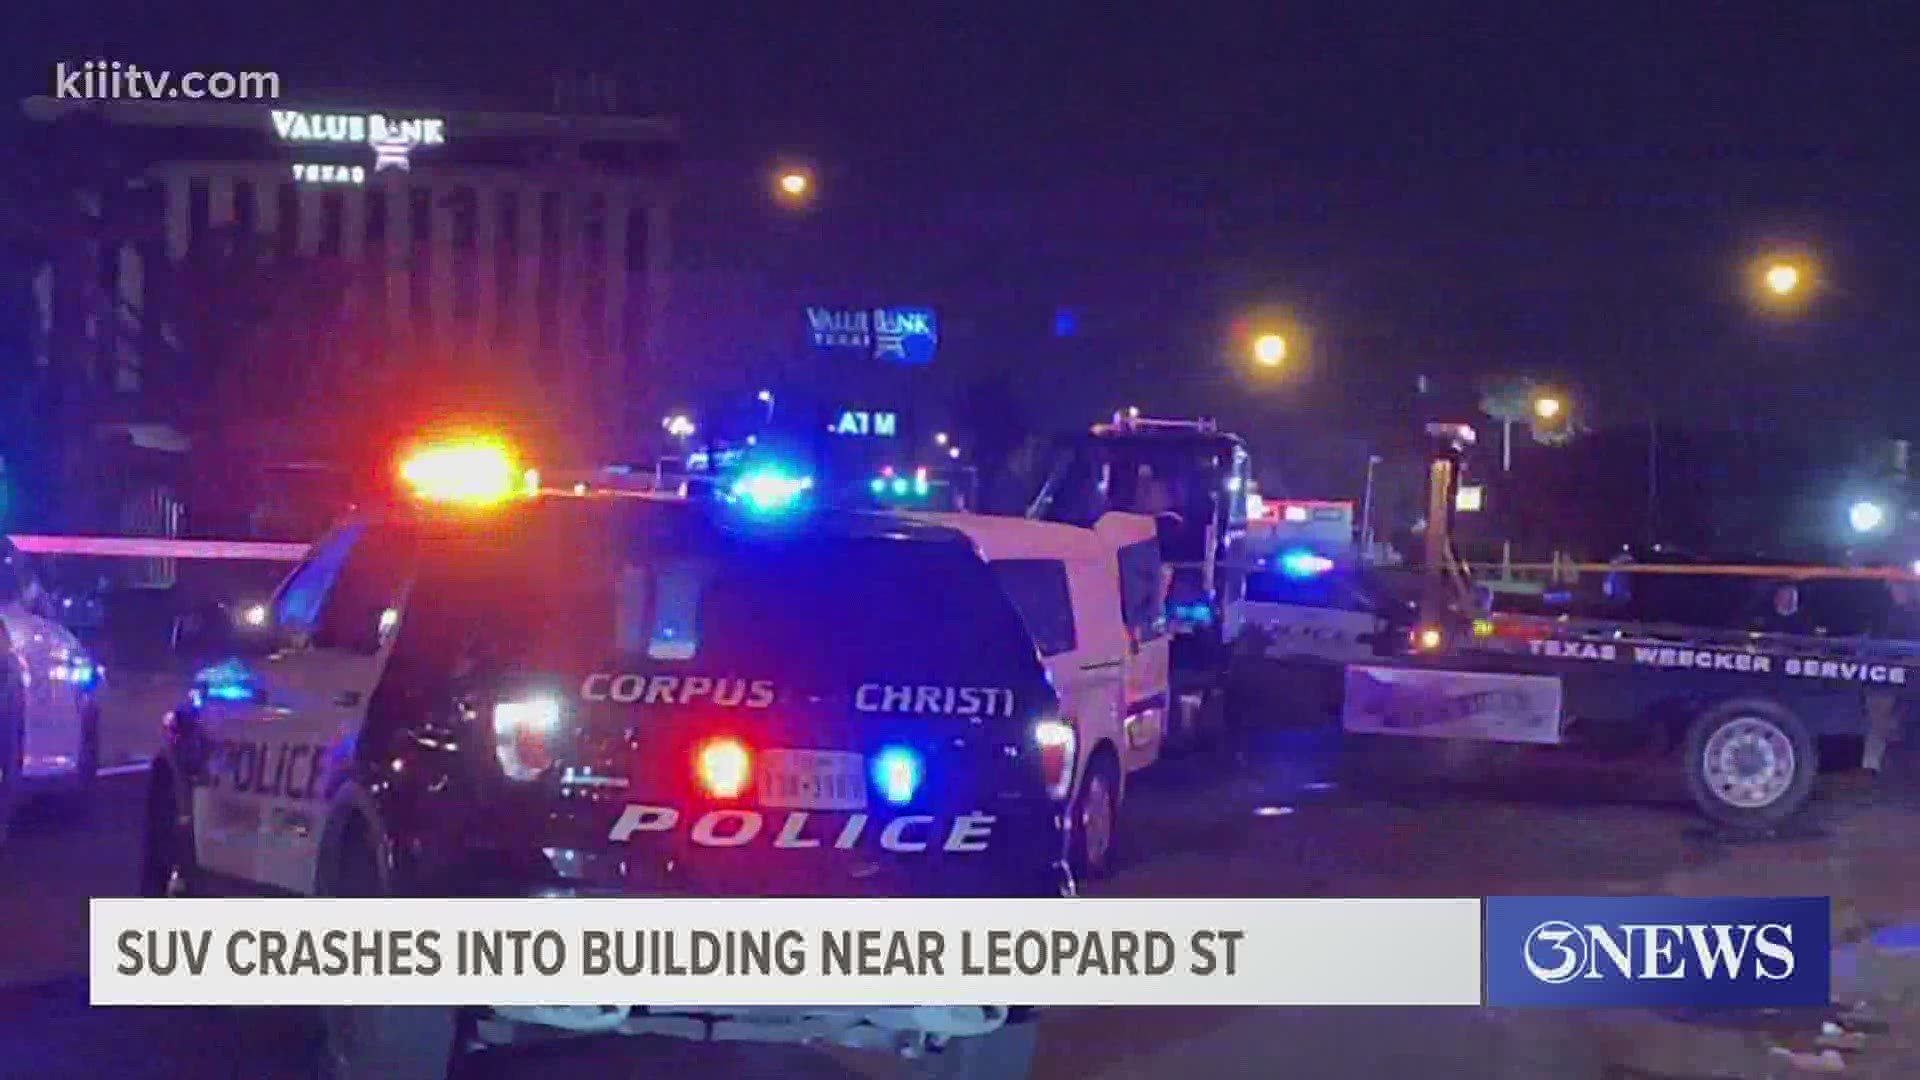 Three females in a SUV crashed into a building near leopard street, downtown earlier this evening.